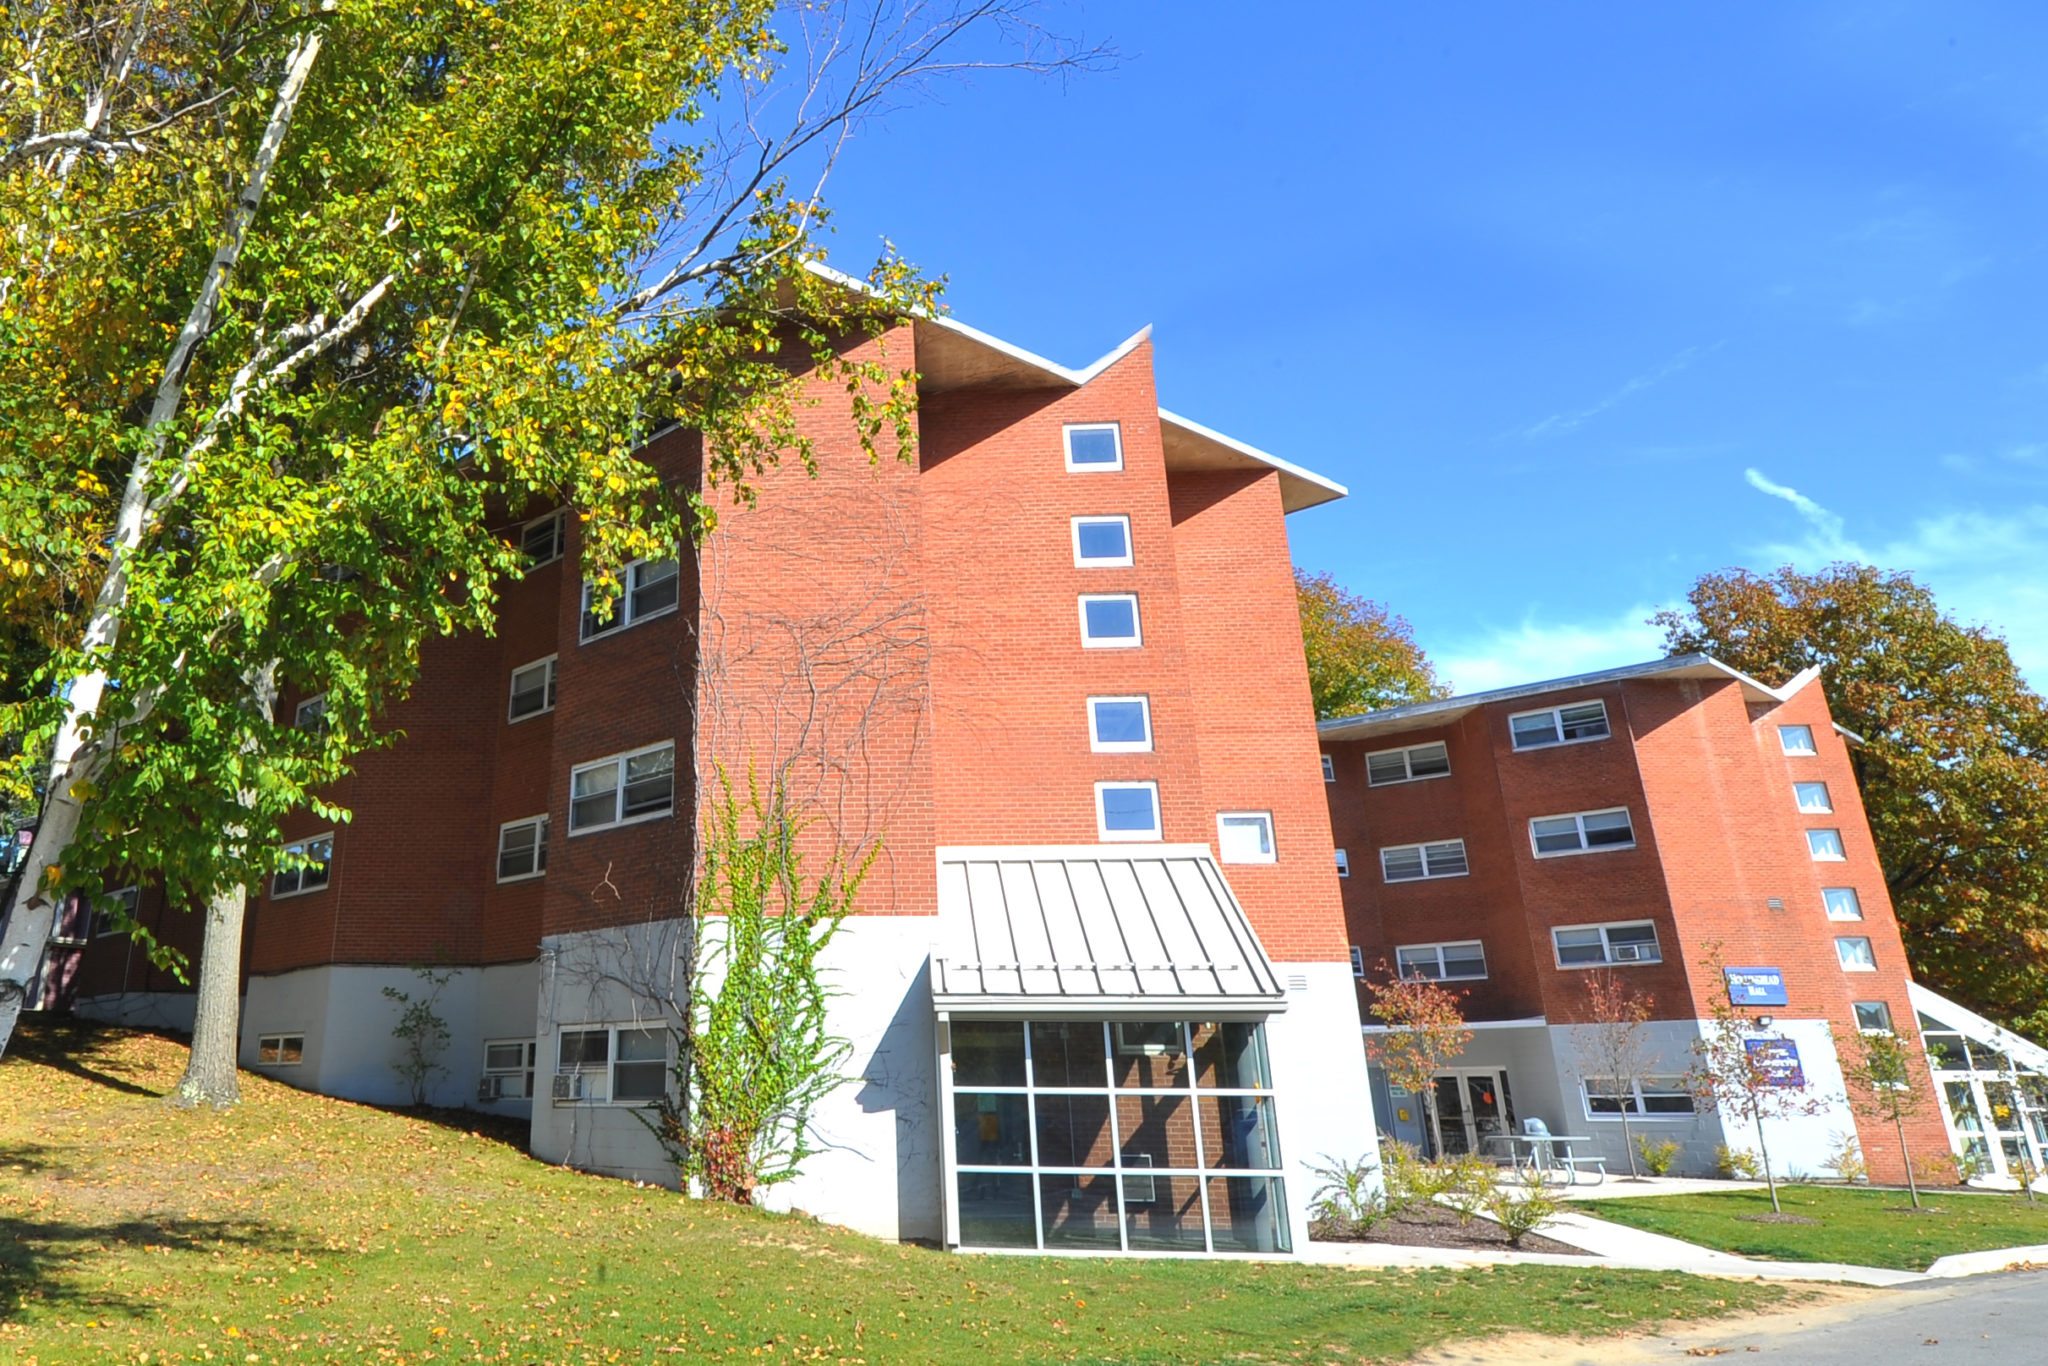 Two brick residence halls with windows and glass entryway at Keystone College